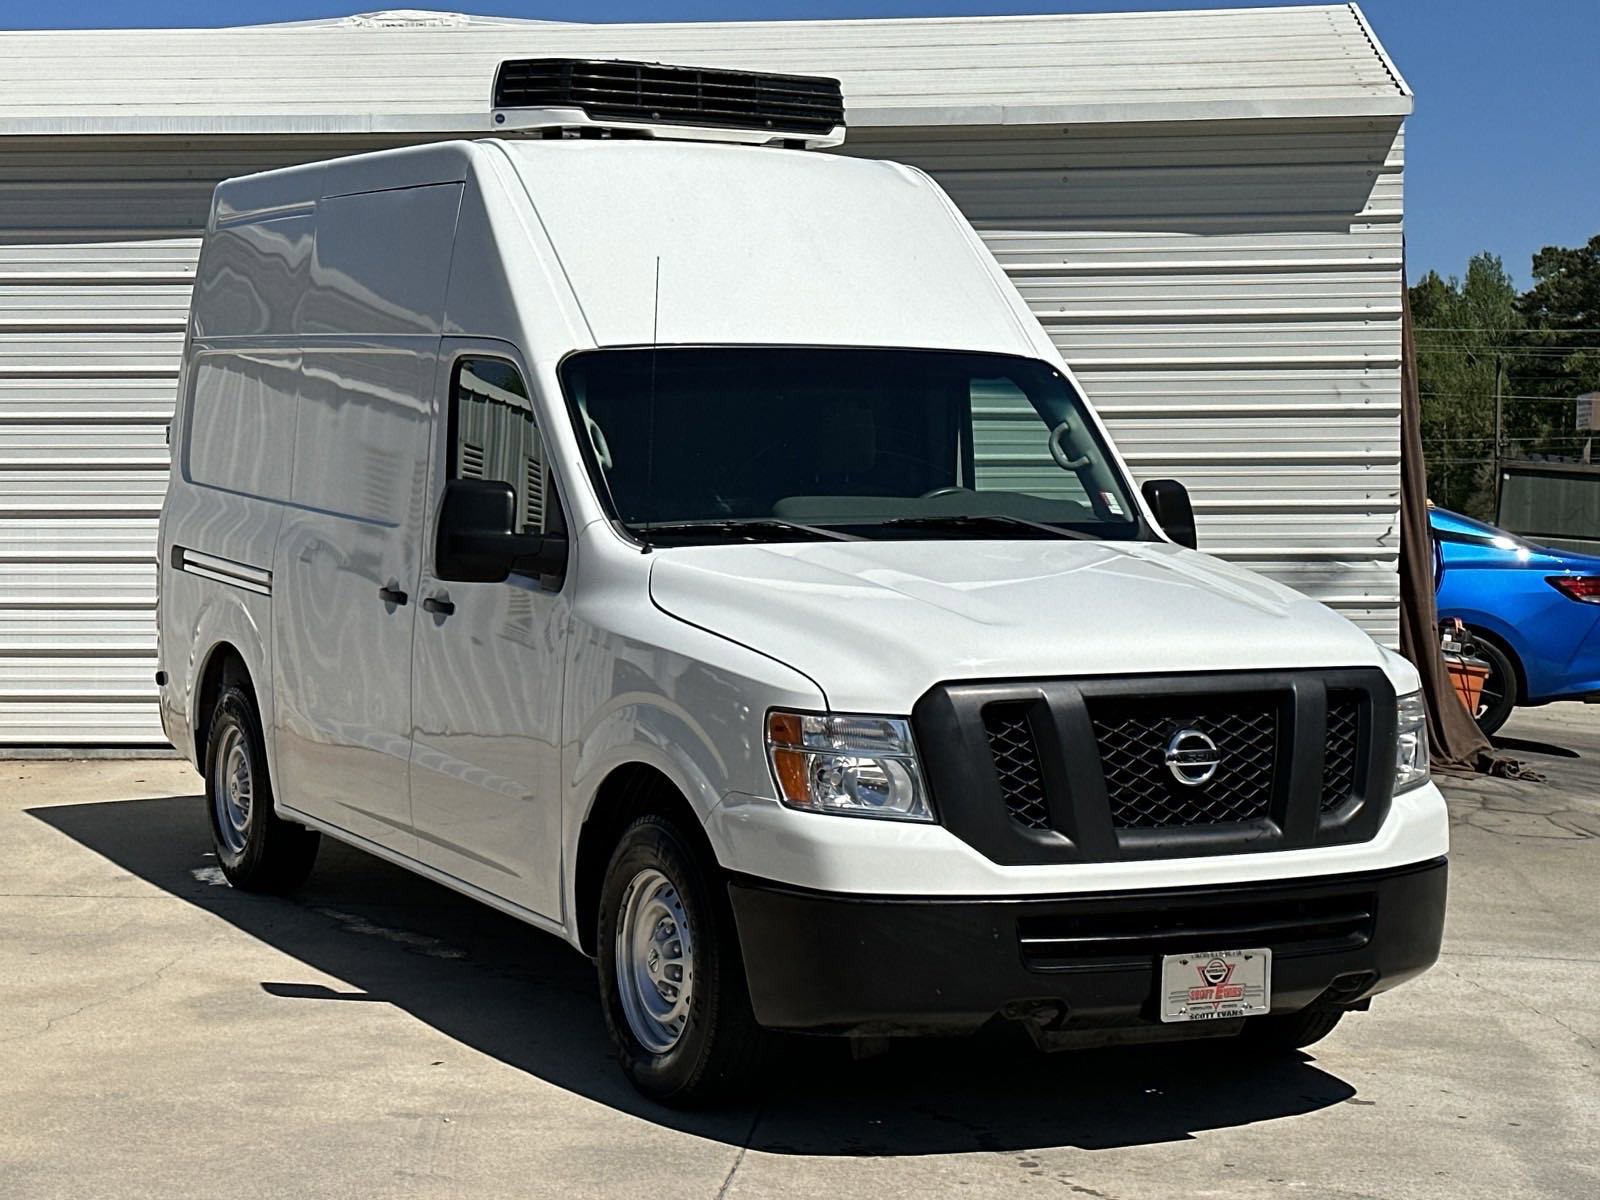 Pre-Owned 2017 Nissan NV Cargo S High Roof Refrigerated Full-size Cargo Van  in Carrollton #23255A | Scott Evans Nissan